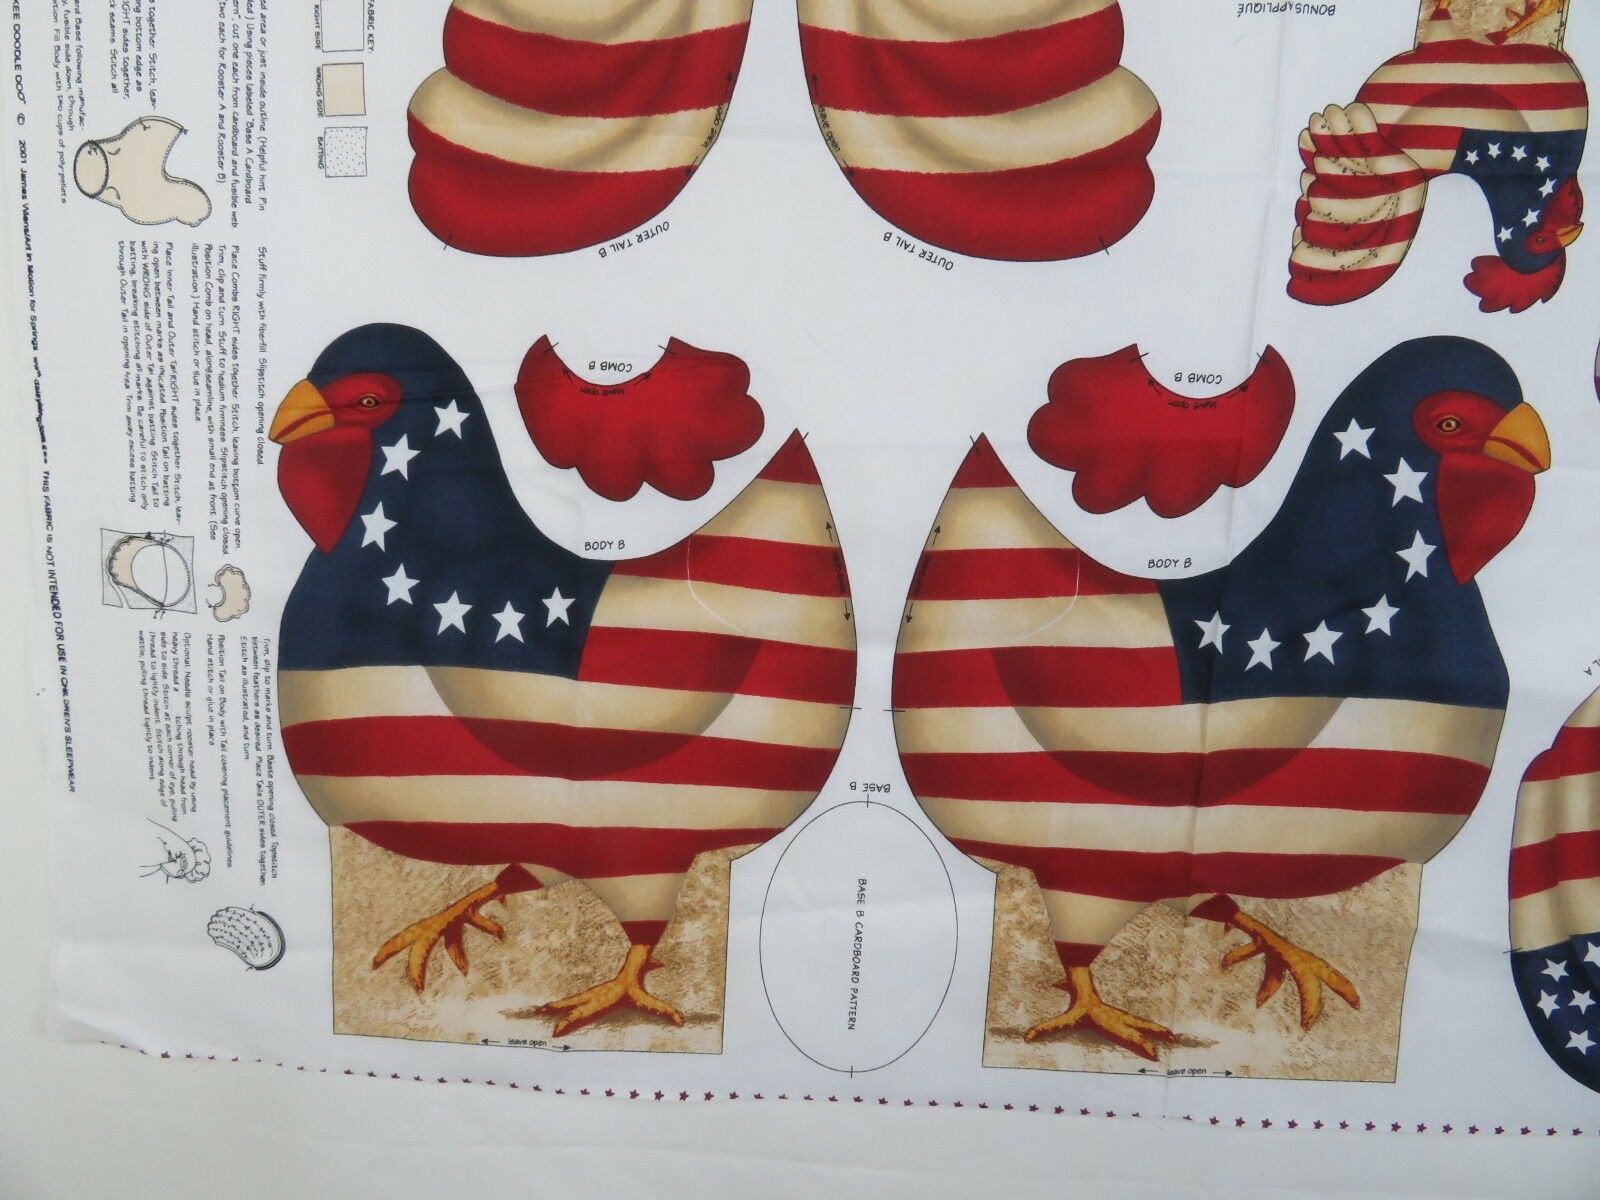 Rooster Dolls Cut Sew Fabric Panel Patriotic Yankee Doodle Daisy Kingdom July 4 - At Grandma's Table